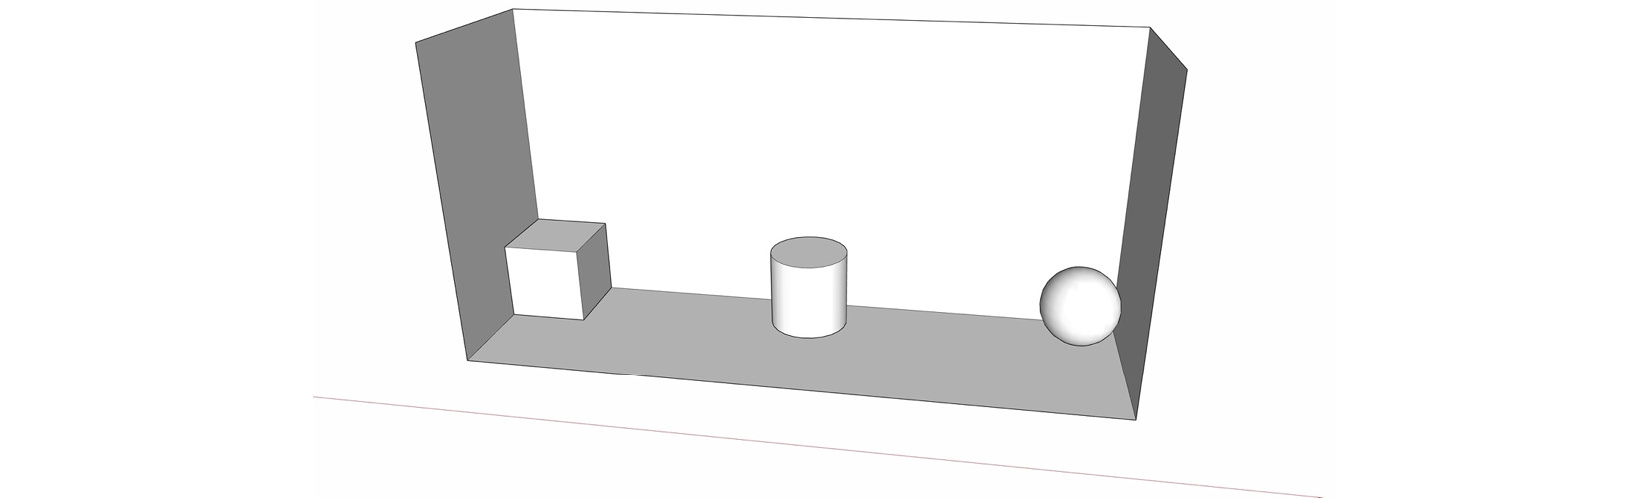 Figure 4.15 – The box, cylinder, and sphere snapped to the geometry behind
